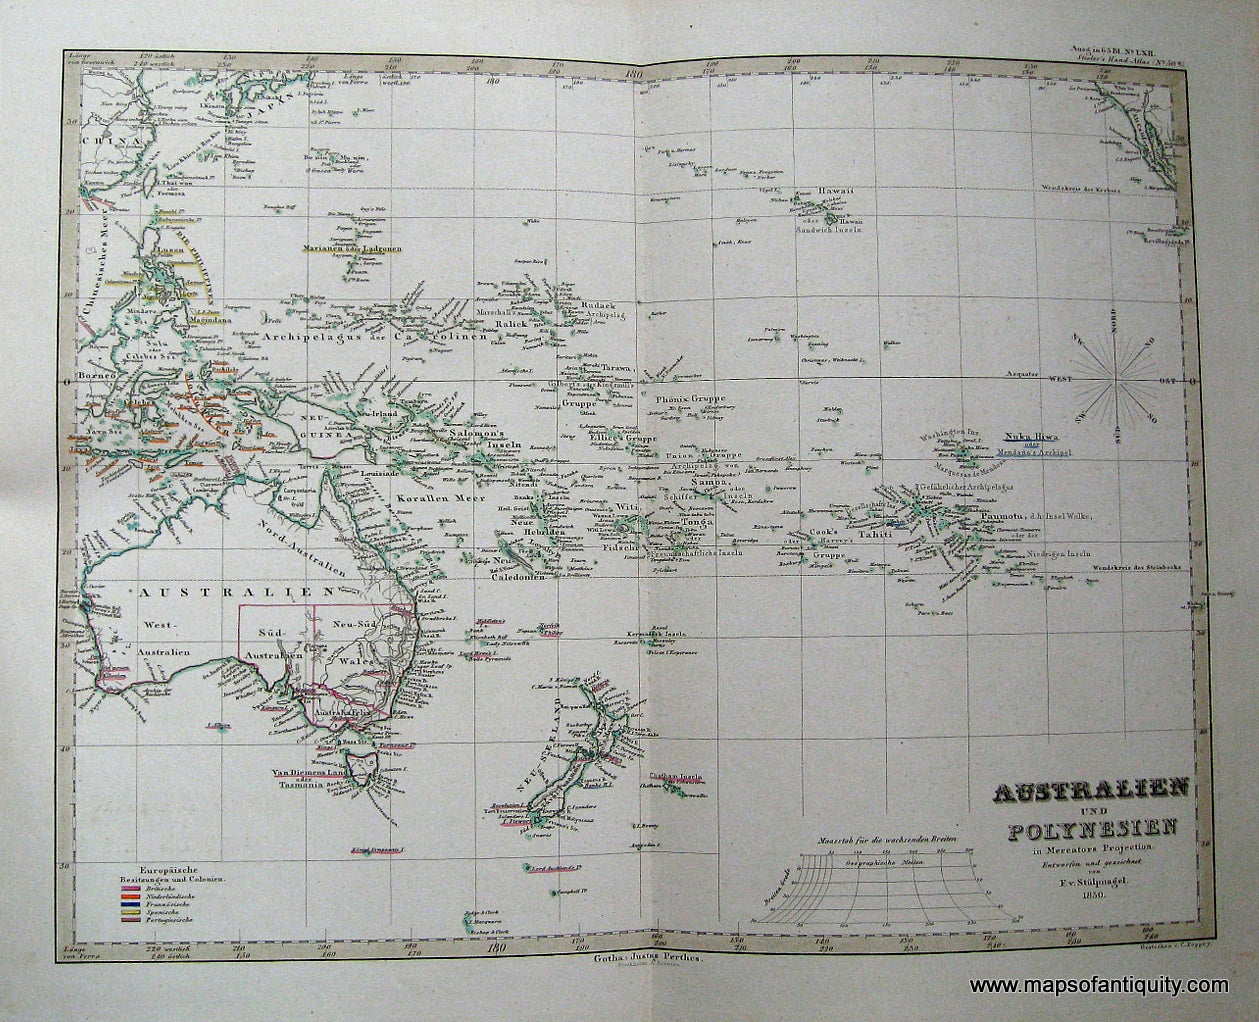 Antique-Hand-Colored-Map-Australien-und-Polynesien-in-Mercators-Projection.-Oceania--circa-1850-Stieler-Maps-Of-Antiquity